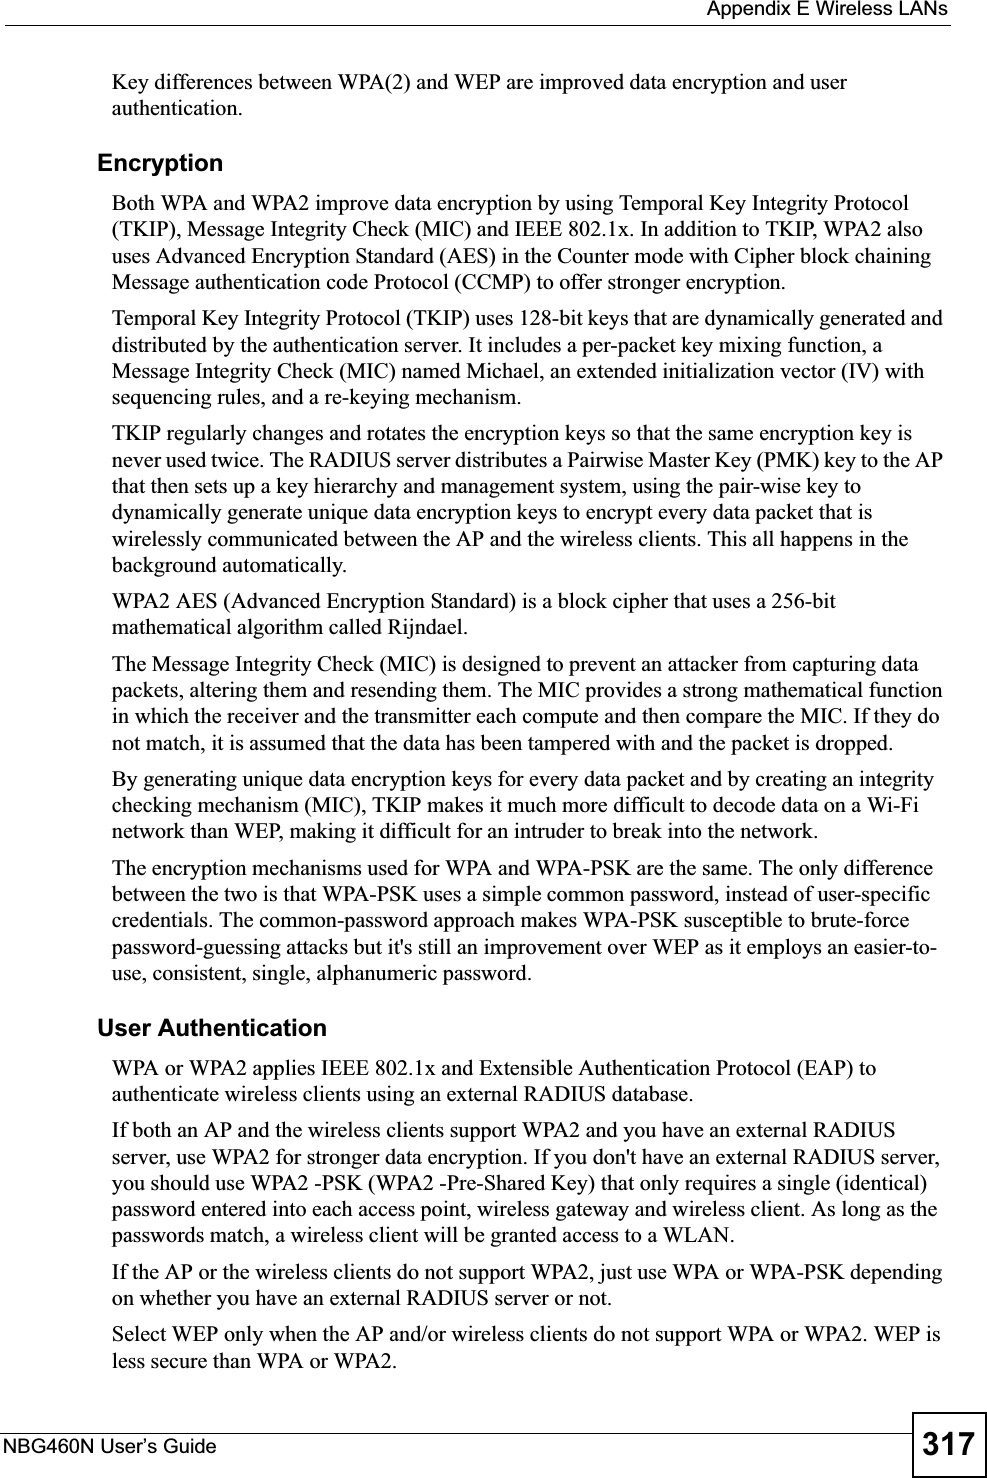  Appendix E Wireless LANsNBG460N User’s Guide 317Key differences between WPA(2) and WEP are improved data encryption and user authentication.    EncryptionBoth WPA and WPA2 improve data encryption by using Temporal Key Integrity Protocol (TKIP), Message Integrity Check (MIC) and IEEE 802.1x. In addition to TKIP, WPA2 also uses Advanced Encryption Standard (AES) in the Counter mode with Cipher block chaining Message authentication code Protocol (CCMP) to offer stronger encryption. Temporal Key Integrity Protocol (TKIP) uses 128-bit keys that are dynamically generated and distributed by the authentication server. It includes a per-packet key mixing function, a Message Integrity Check (MIC) named Michael, an extended initialization vector (IV) with sequencing rules, and a re-keying mechanism.TKIP regularly changes and rotates the encryption keys so that the same encryption key is never used twice. The RADIUS server distributes a Pairwise Master Key (PMK) key to the AP that then sets up a key hierarchy and management system, using the pair-wise key to dynamically generate unique data encryption keys to encrypt every data packet that is wirelessly communicated between the AP and the wireless clients. This all happens in the background automatically.WPA2 AES (Advanced Encryption Standard) is a block cipher that uses a 256-bit mathematical algorithm called Rijndael.The Message Integrity Check (MIC) is designed to prevent an attacker from capturing data packets, altering them and resending them. The MIC provides a strong mathematical function in which the receiver and the transmitter each compute and then compare the MIC. If they do not match, it is assumed that the data has been tampered with and the packet is dropped. By generating unique data encryption keys for every data packet and by creating an integrity checking mechanism (MIC), TKIP makes it much more difficult to decode data on a Wi-Fi network than WEP, making it difficult for an intruder to break into the network. The encryption mechanisms used for WPA and WPA-PSK are the same. The only difference between the two is that WPA-PSK uses a simple common password, instead of user-specific credentials. The common-password approach makes WPA-PSK susceptible to brute-force password-guessing attacks but it&apos;s still an improvement over WEP as it employs an easier-to-use, consistent, single, alphanumeric password.  User AuthenticationWPA or WPA2 applies IEEE 802.1x and Extensible Authentication Protocol (EAP) to authenticate wireless clients using an external RADIUS database. If both an AP and the wireless clients support WPA2 and you have an external RADIUS server, use WPA2 for stronger data encryption. If you don&apos;t have an external RADIUS server, you should use WPA2 -PSK (WPA2 -Pre-Shared Key) that only requires a single (identical) password entered into each access point, wireless gateway and wireless client. As long as the passwords match, a wireless client will be granted access to a WLAN. If the AP or the wireless clients do not support WPA2, just use WPA or WPA-PSK depending on whether you have an external RADIUS server or not.Select WEP only when the AP and/or wireless clients do not support WPA or WPA2. WEP is less secure than WPA or WPA2.